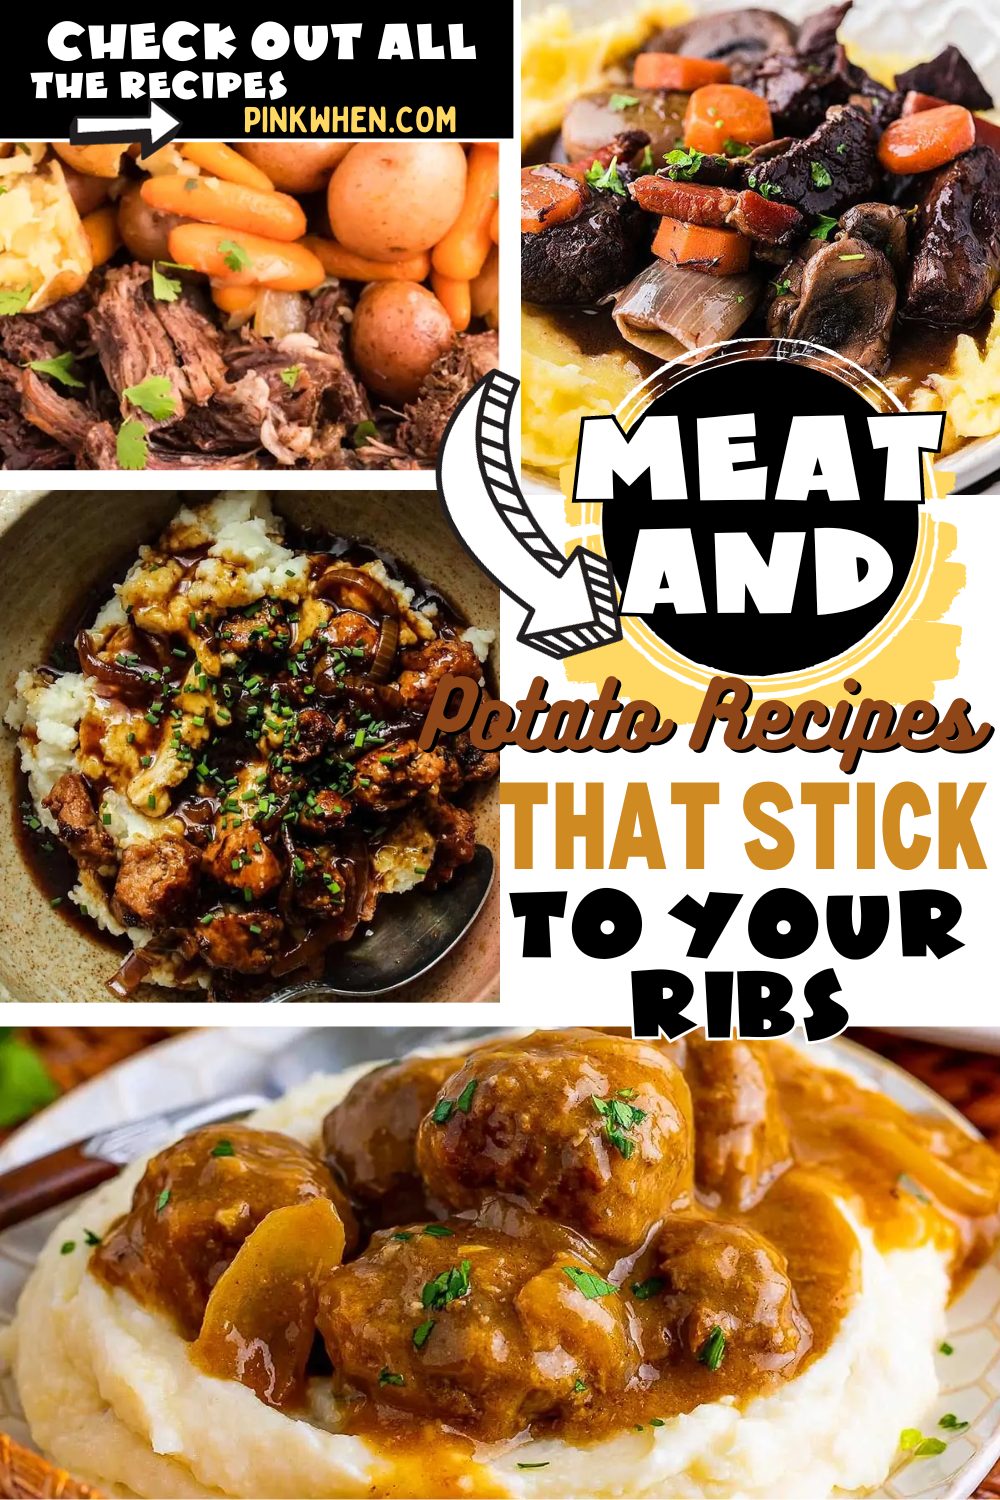 Meat and Potato Recipes That Stick to Your Ribs